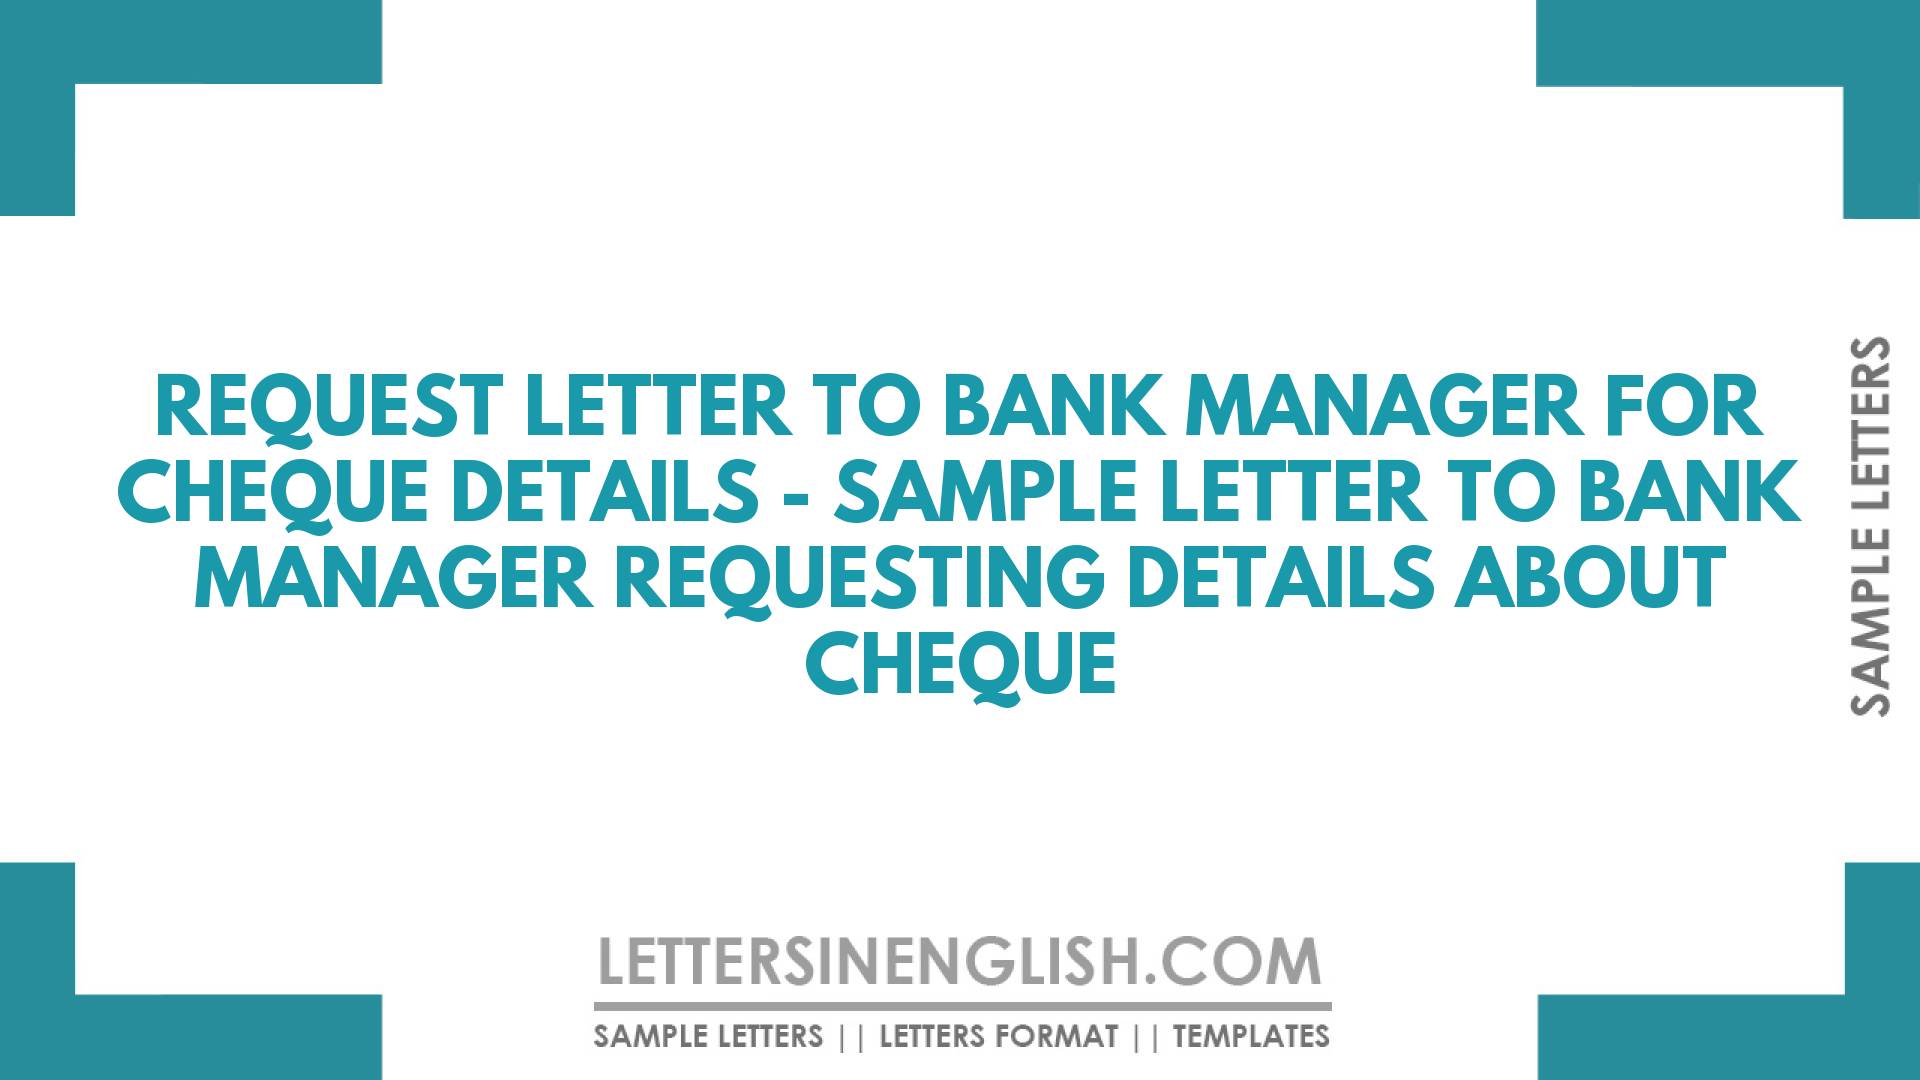 Request Letter to Bank Manager for Cheque Details – Sample Letter to Bank Manager Requesting Details About Cheque